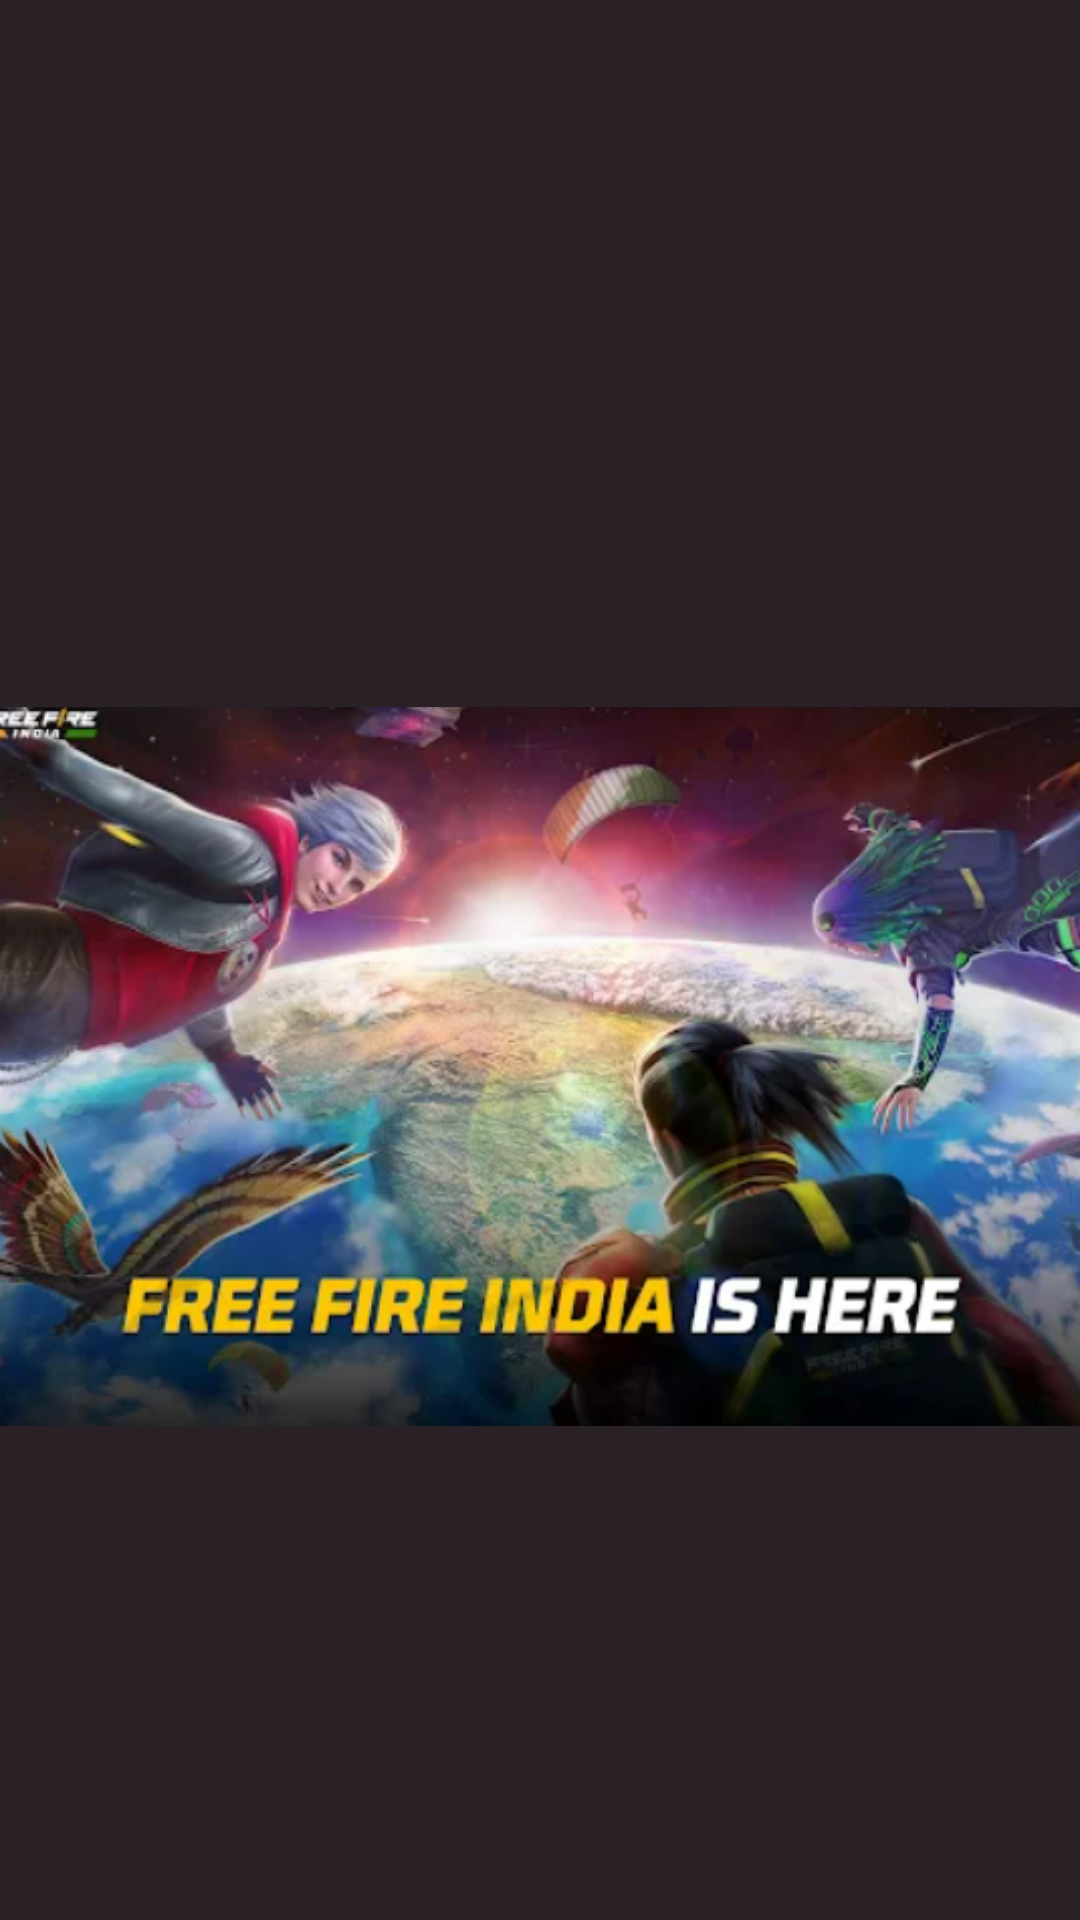 Garena Free Fire returns to India with take a break reminders